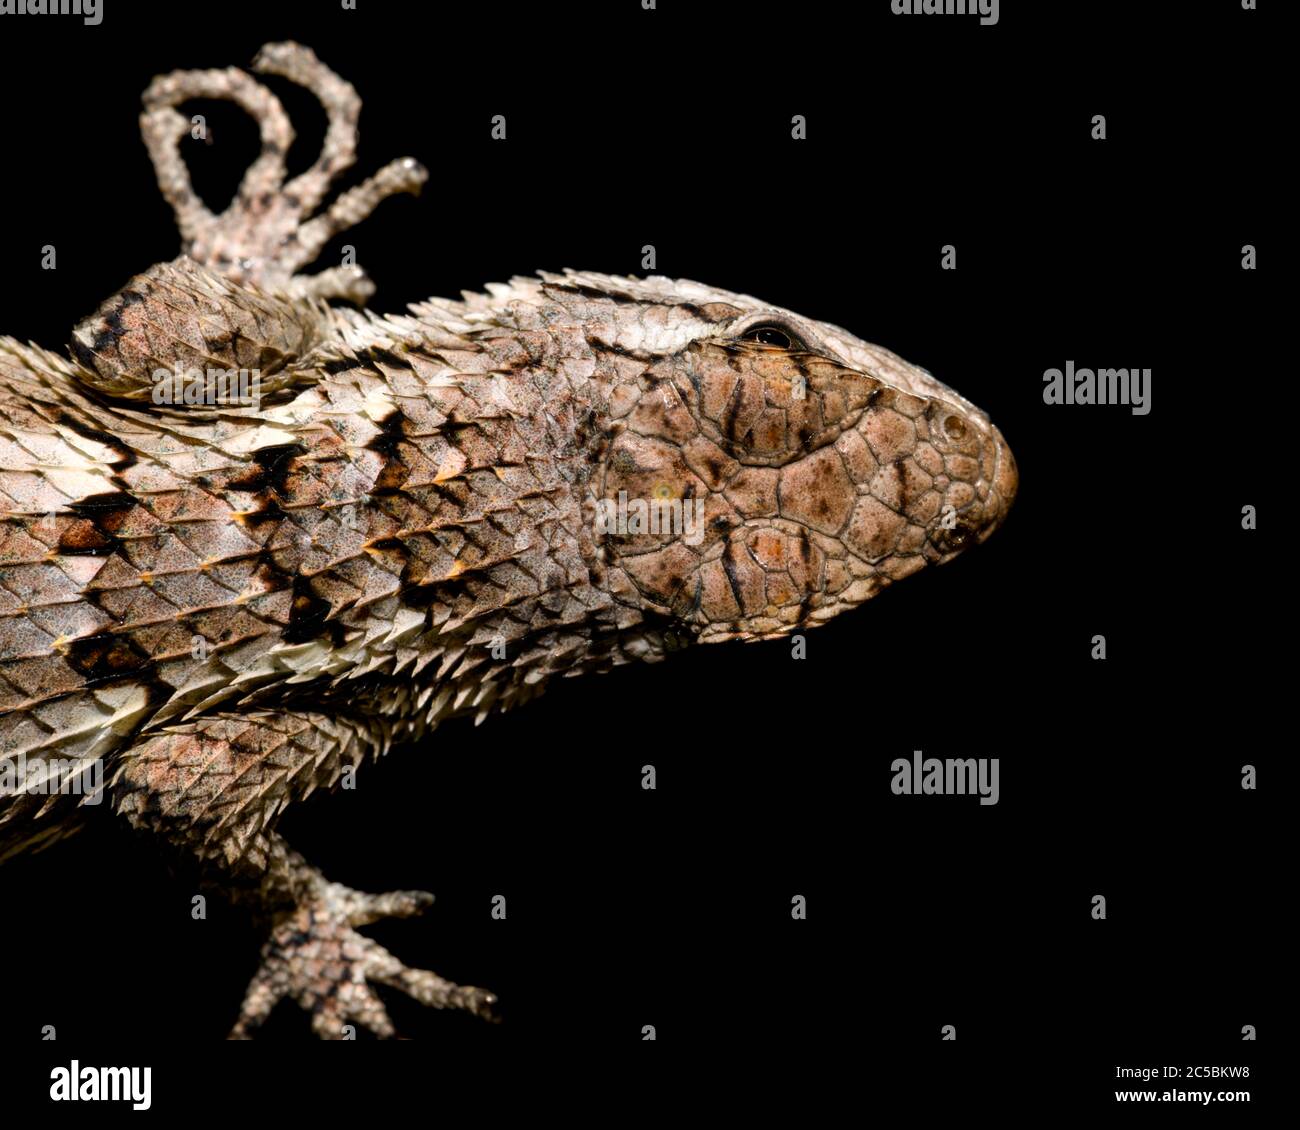 Texas spiny lizard (Sceloporus olivaceus) On black close-up top view of head Stock Photo